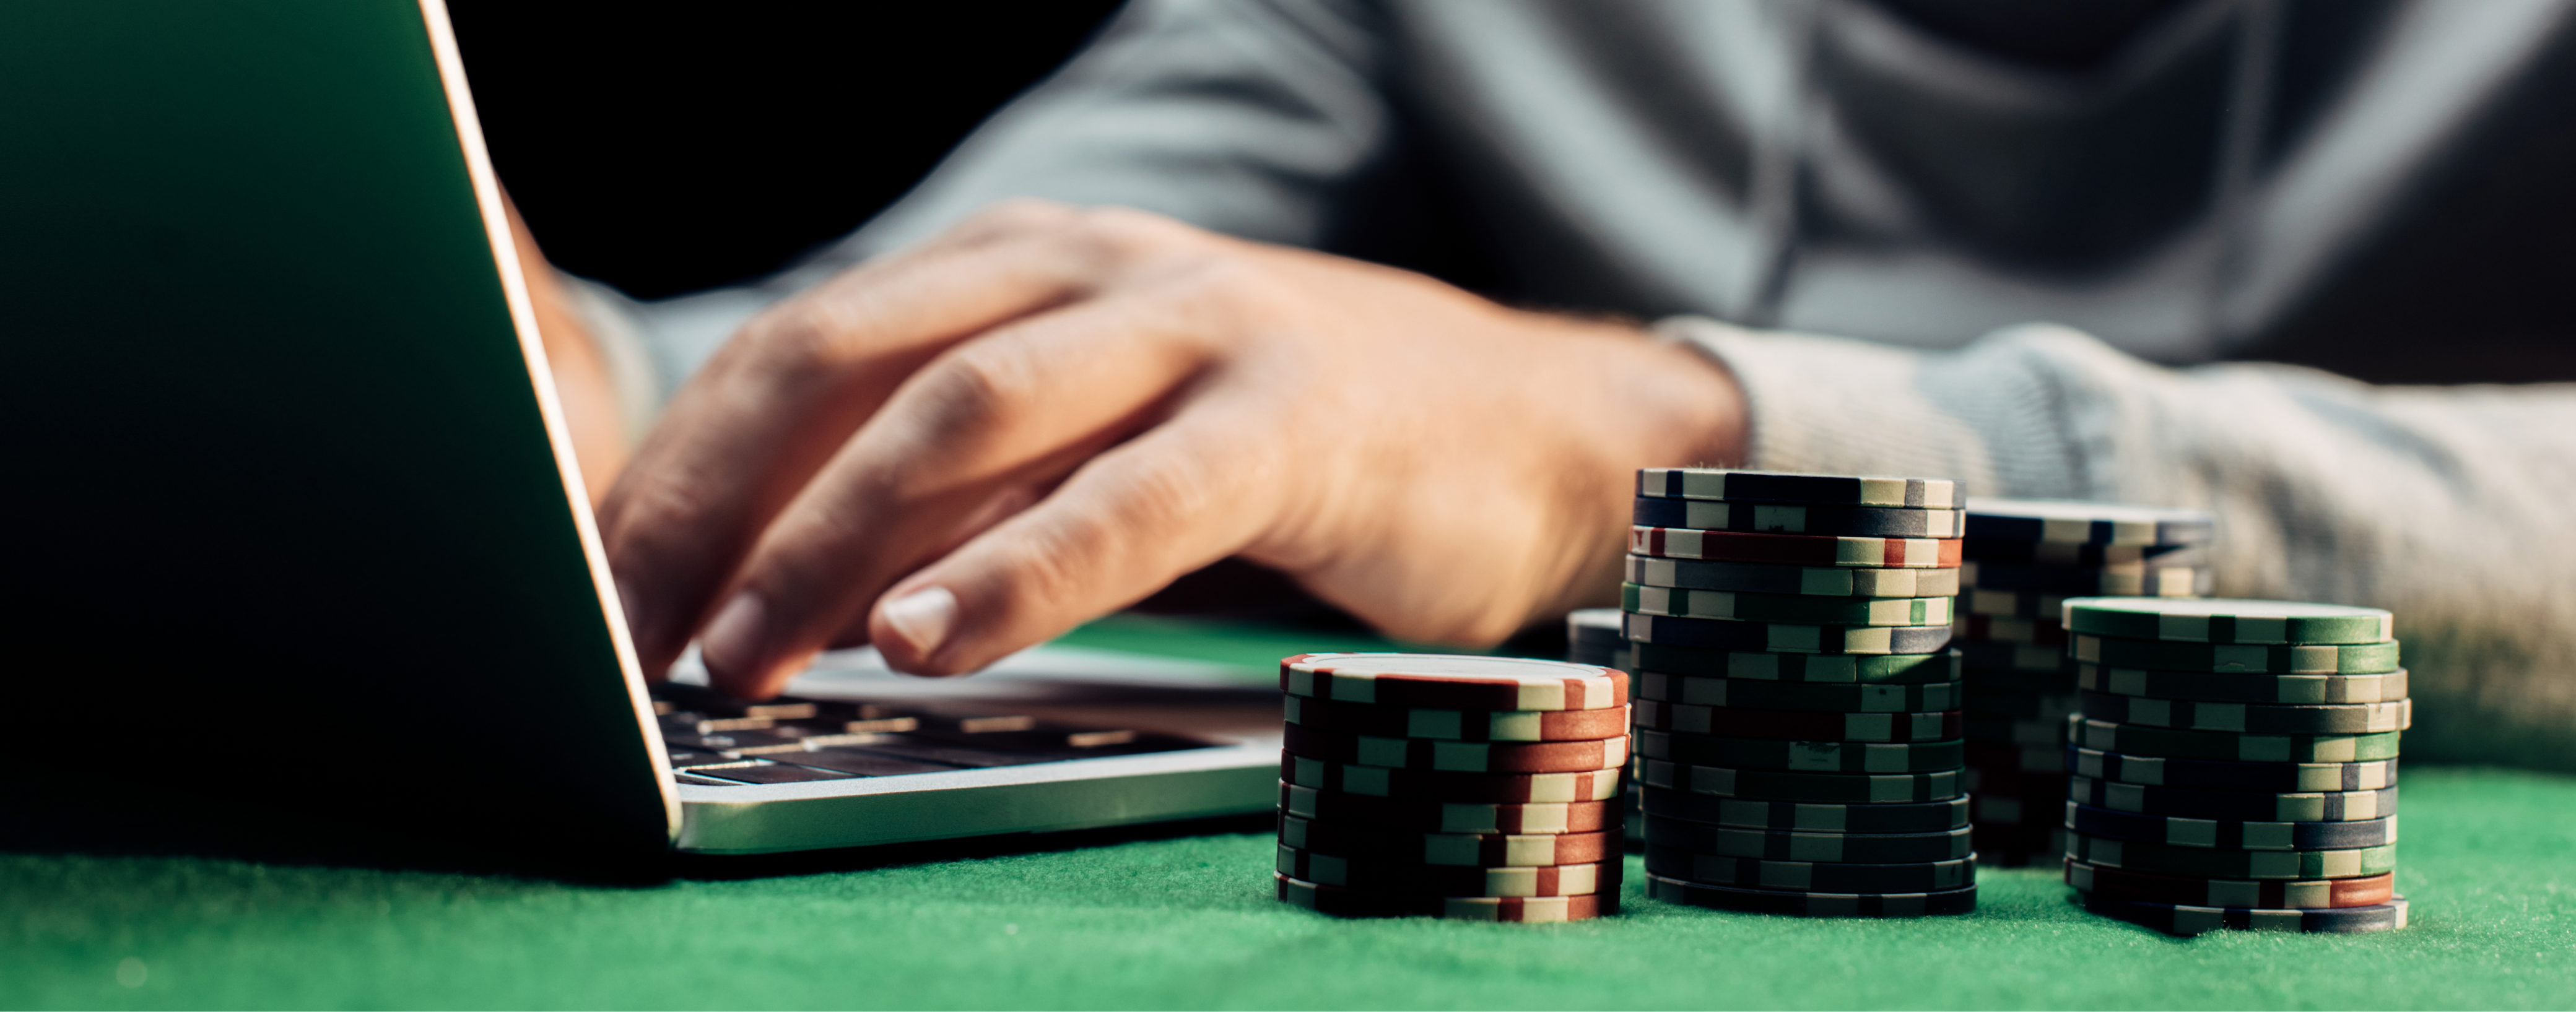 How To Start best online casino for real money With Less Than $110